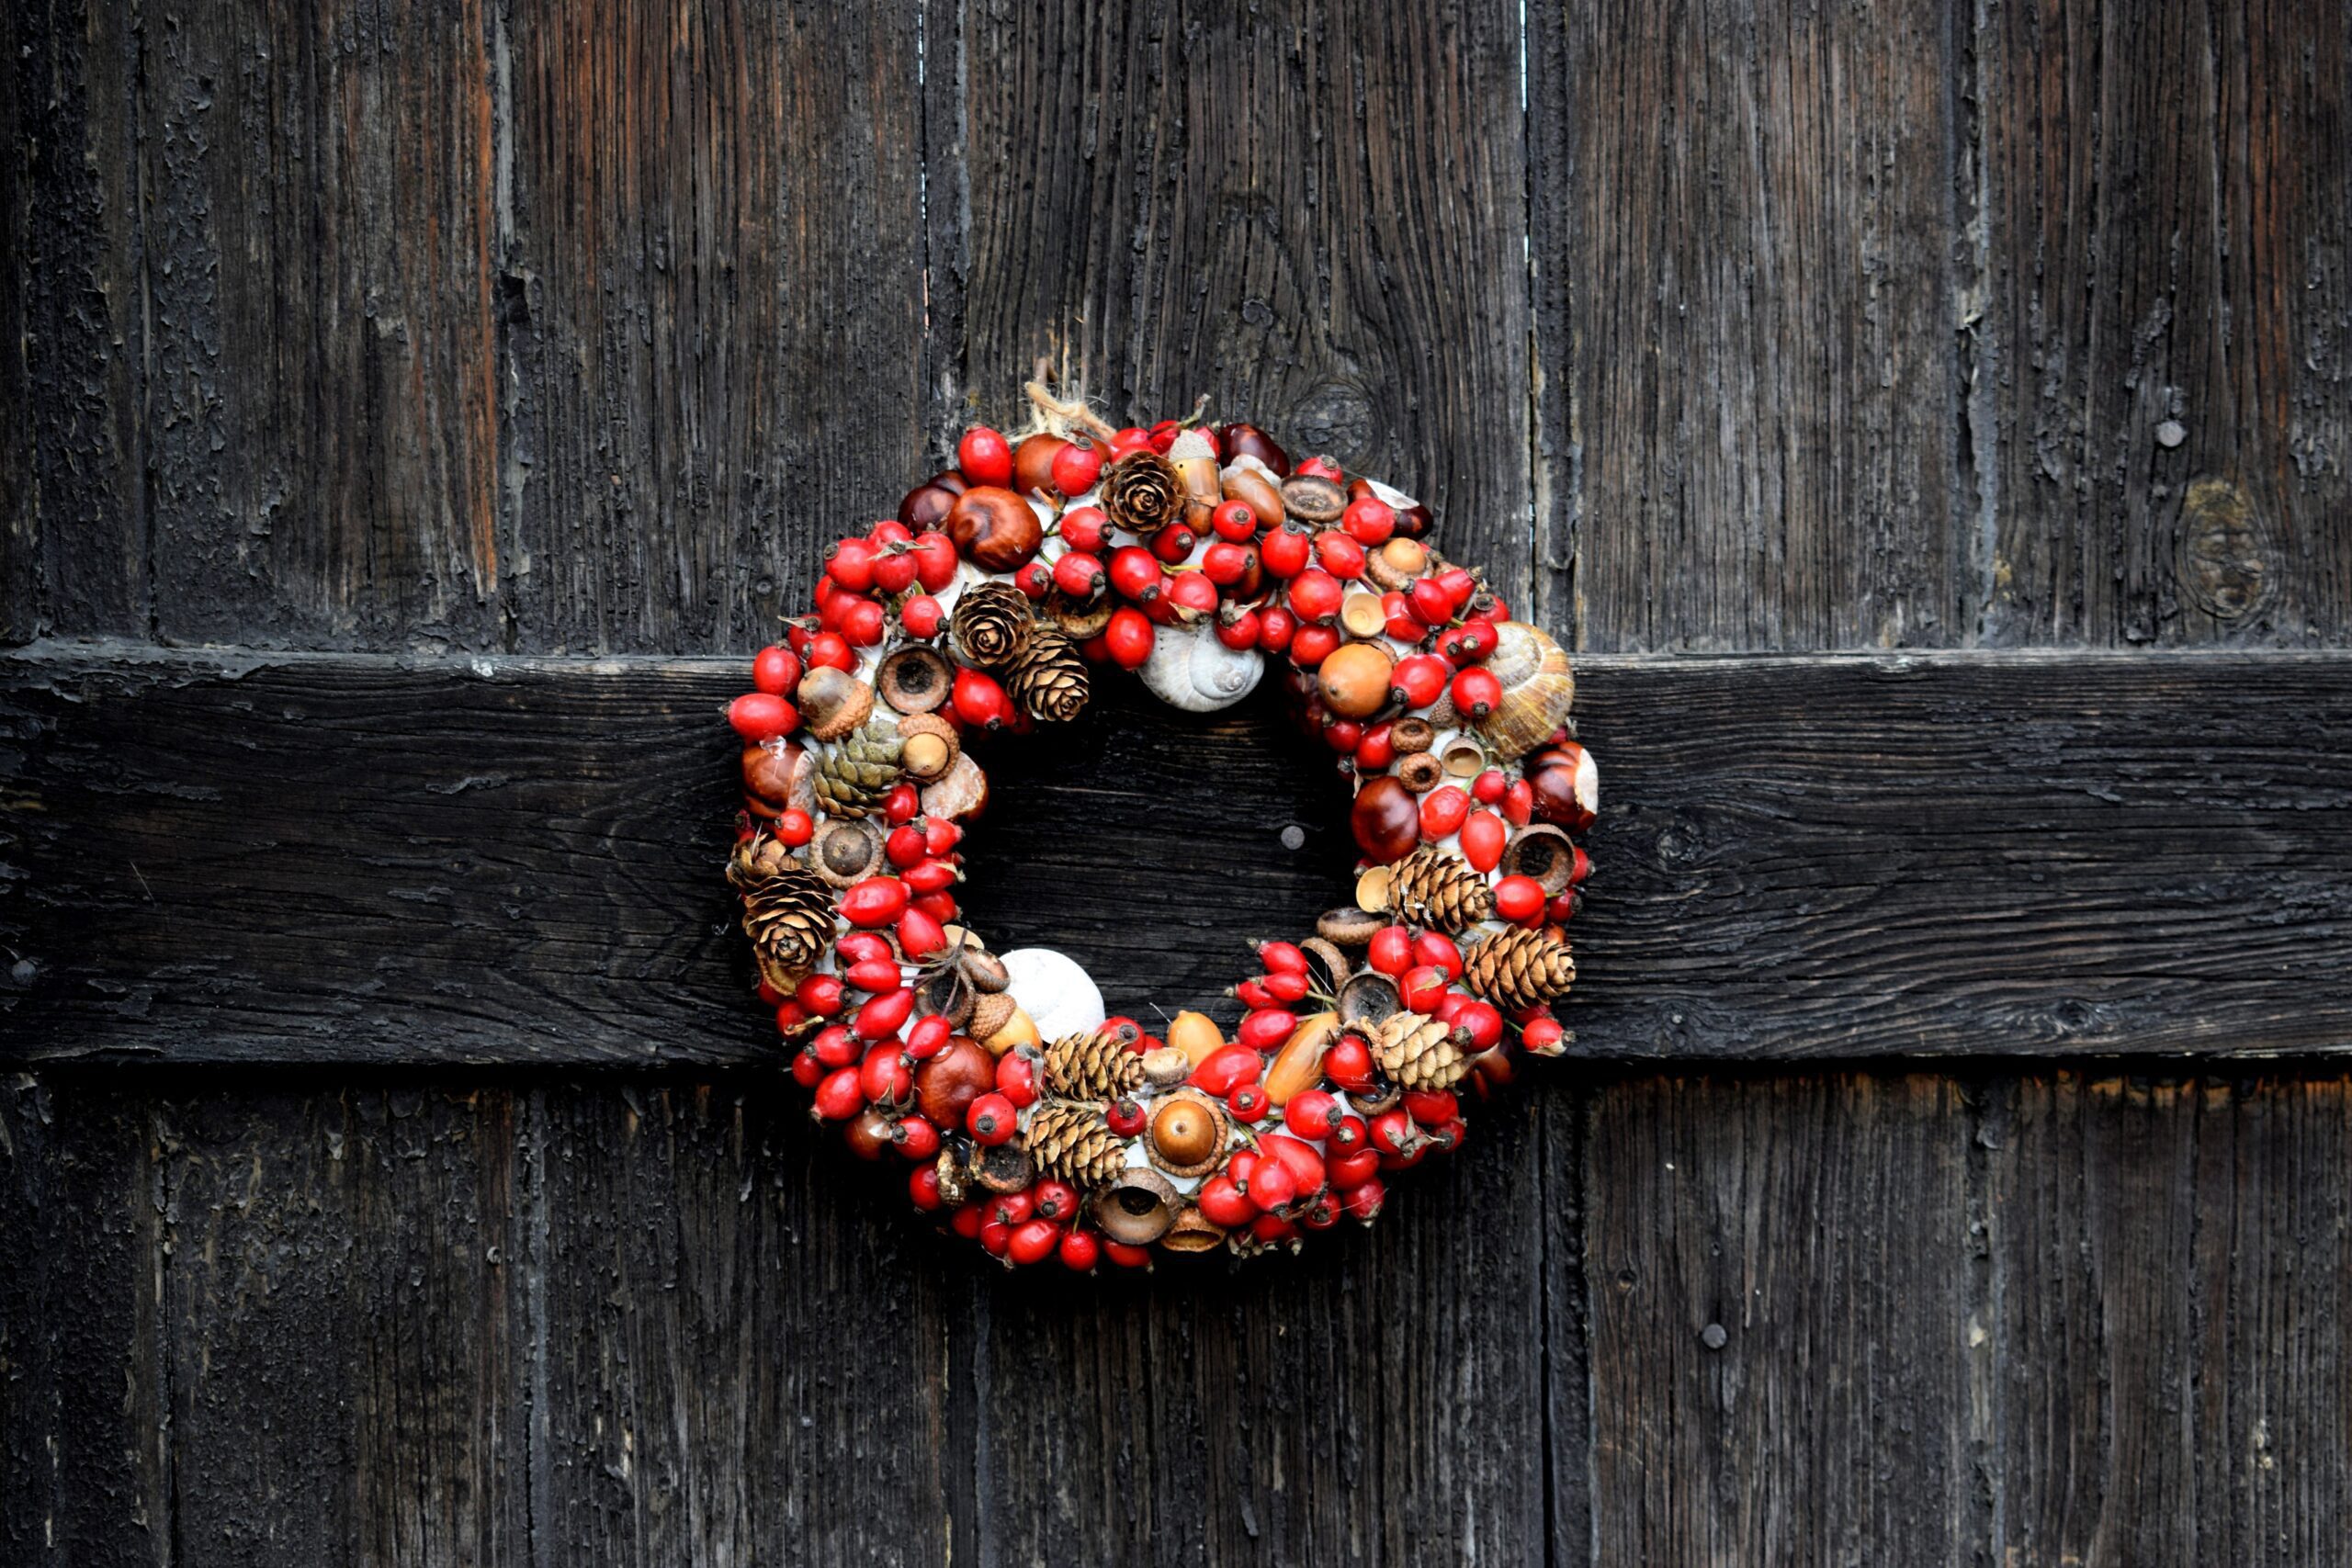 Red holiday wreath on a wood background, highlighting holiday hacks to relieve stress over the holidays